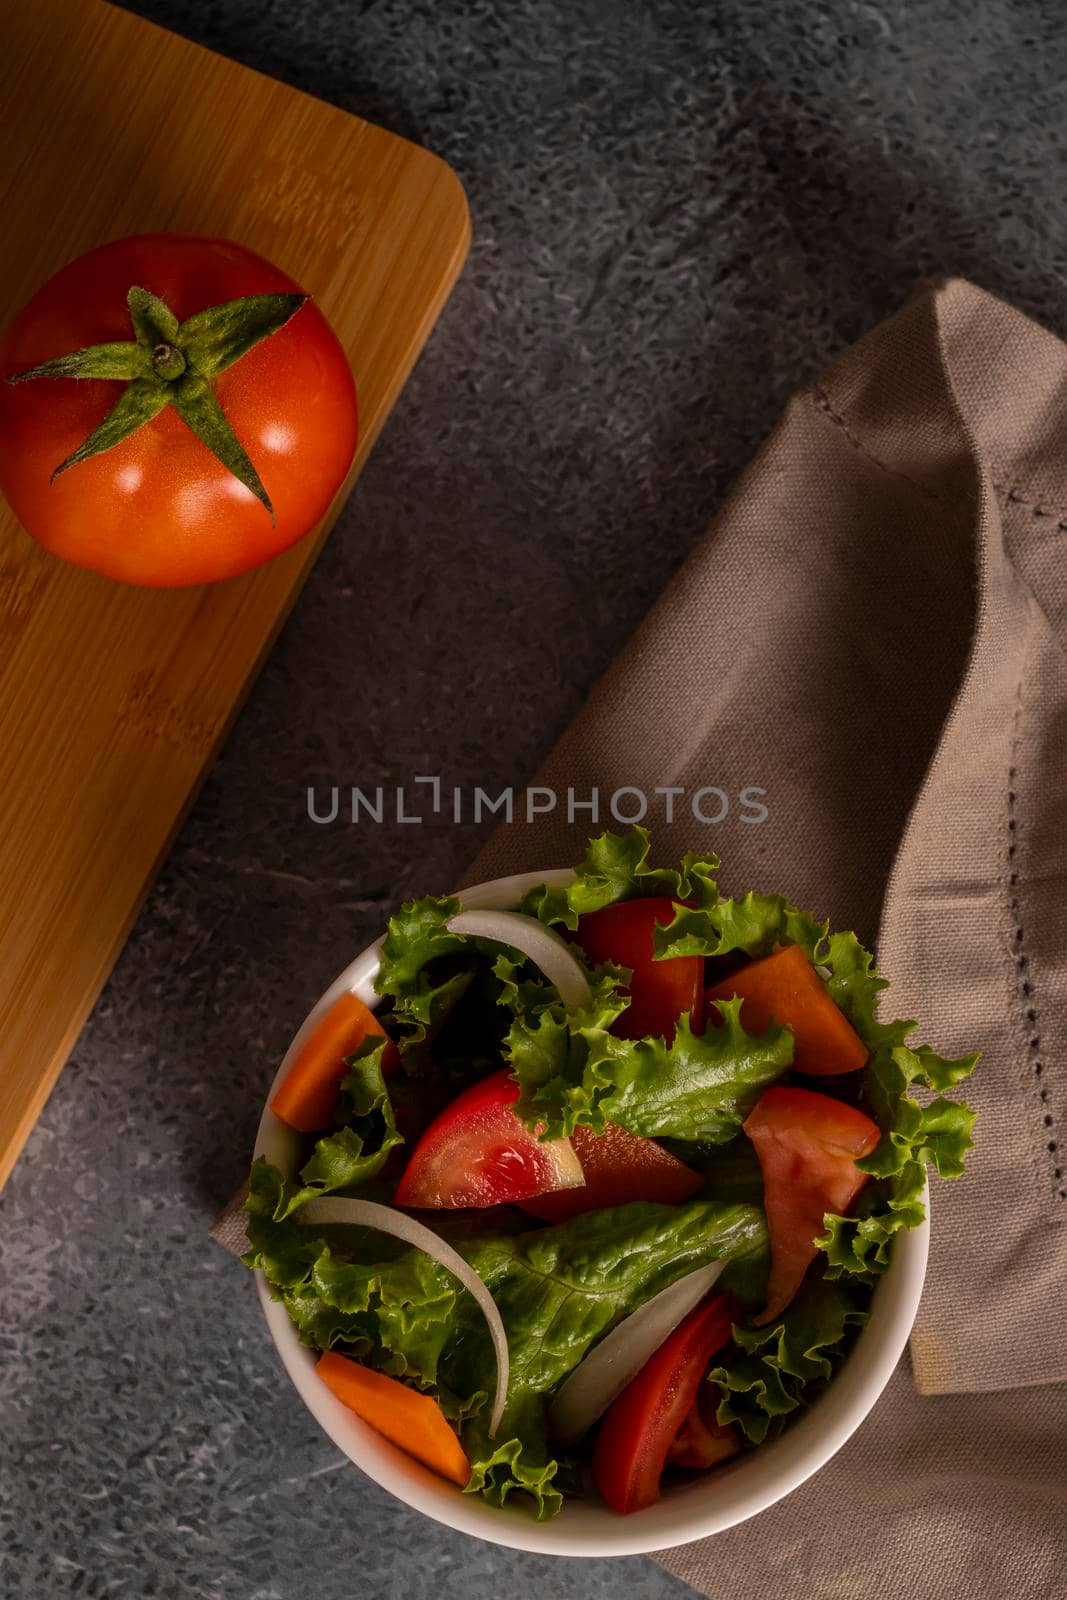 Tomatoes in salad inside a white bowl on grayish background